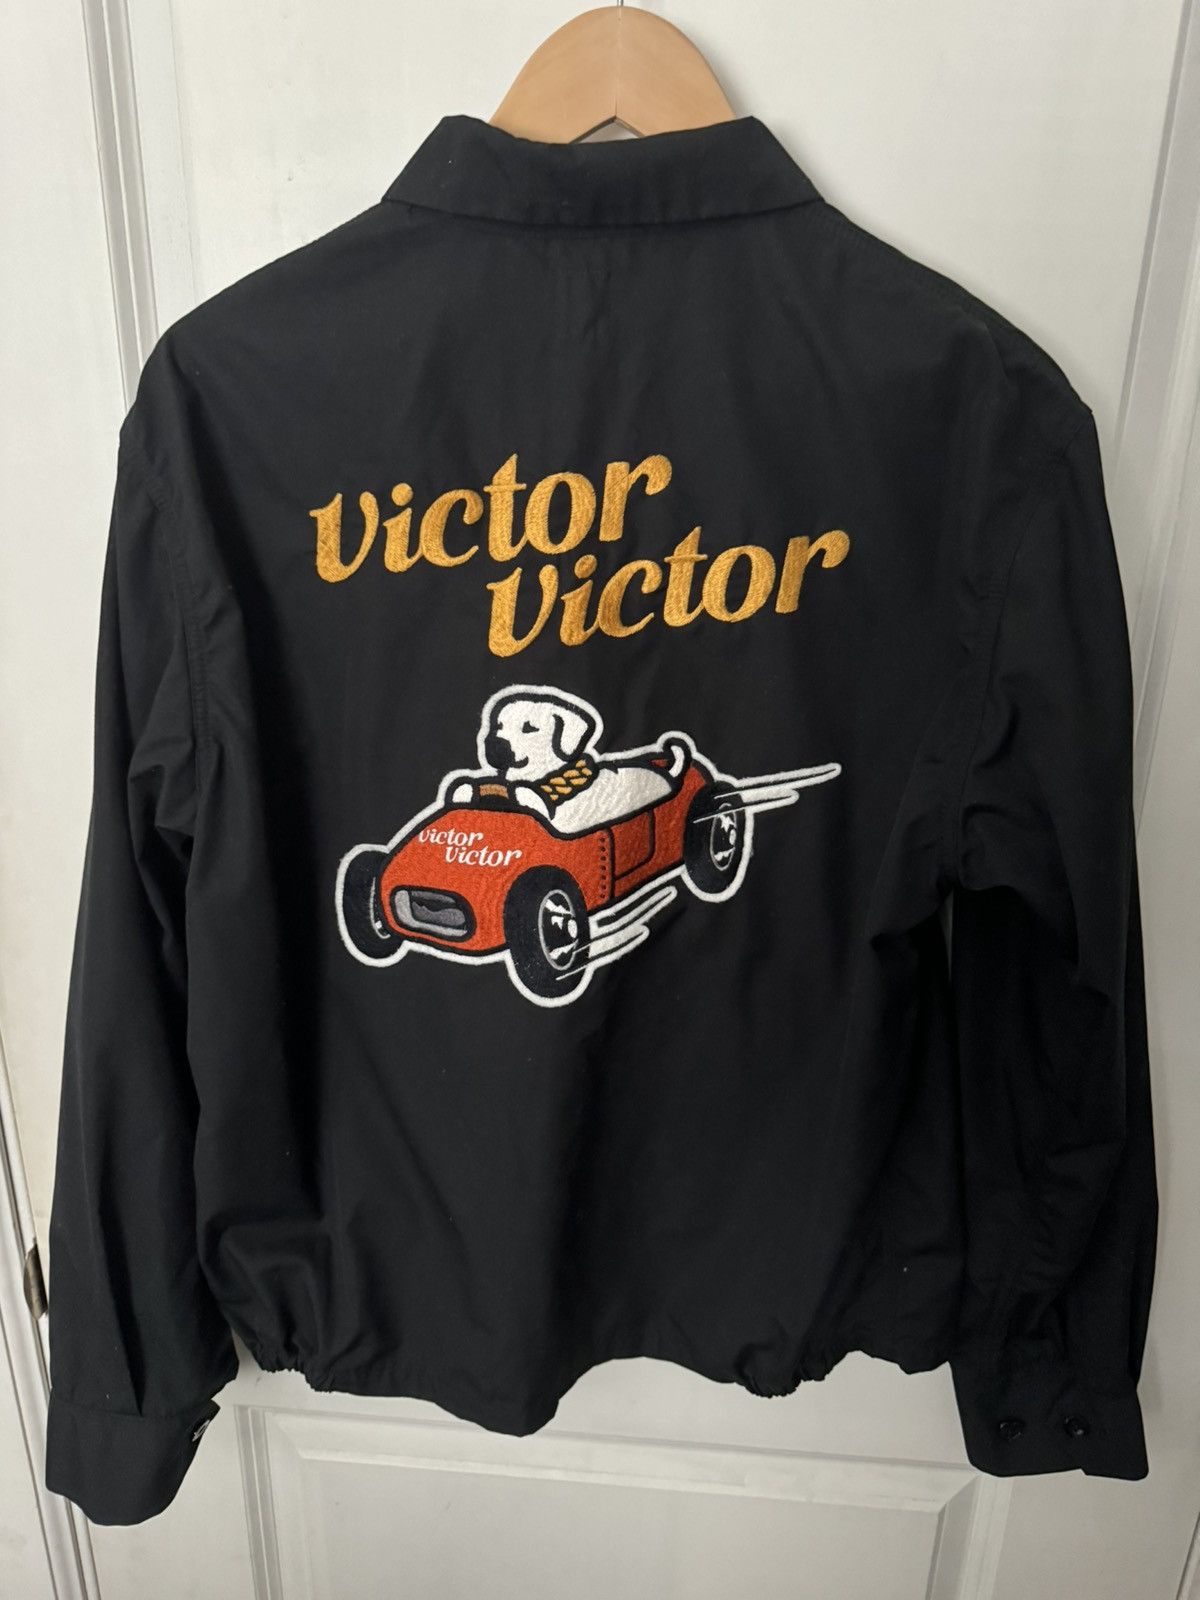 Human Made Human Made x Victor Victor Drizzler Jacket | Grailed